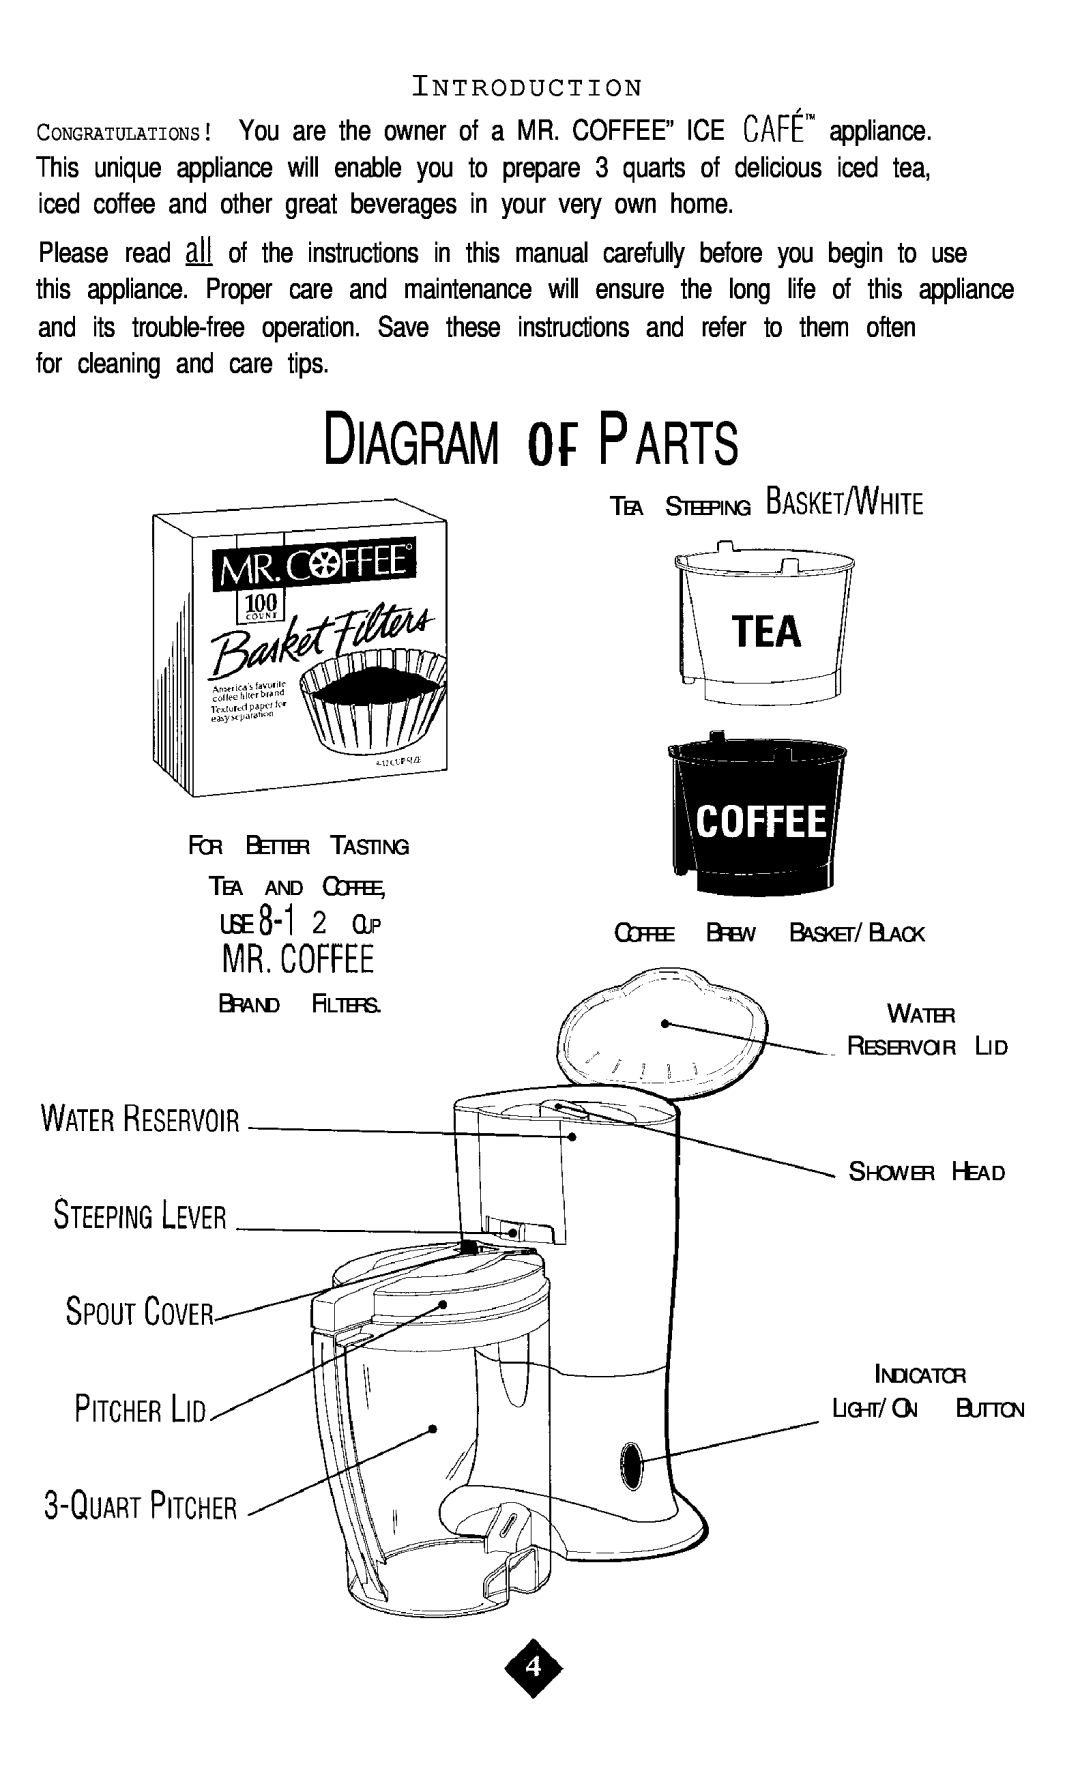 Mr. Coffee TM8D instruction manual Mr.Coffee, DIAGRAM ofPARTS, Introduction 